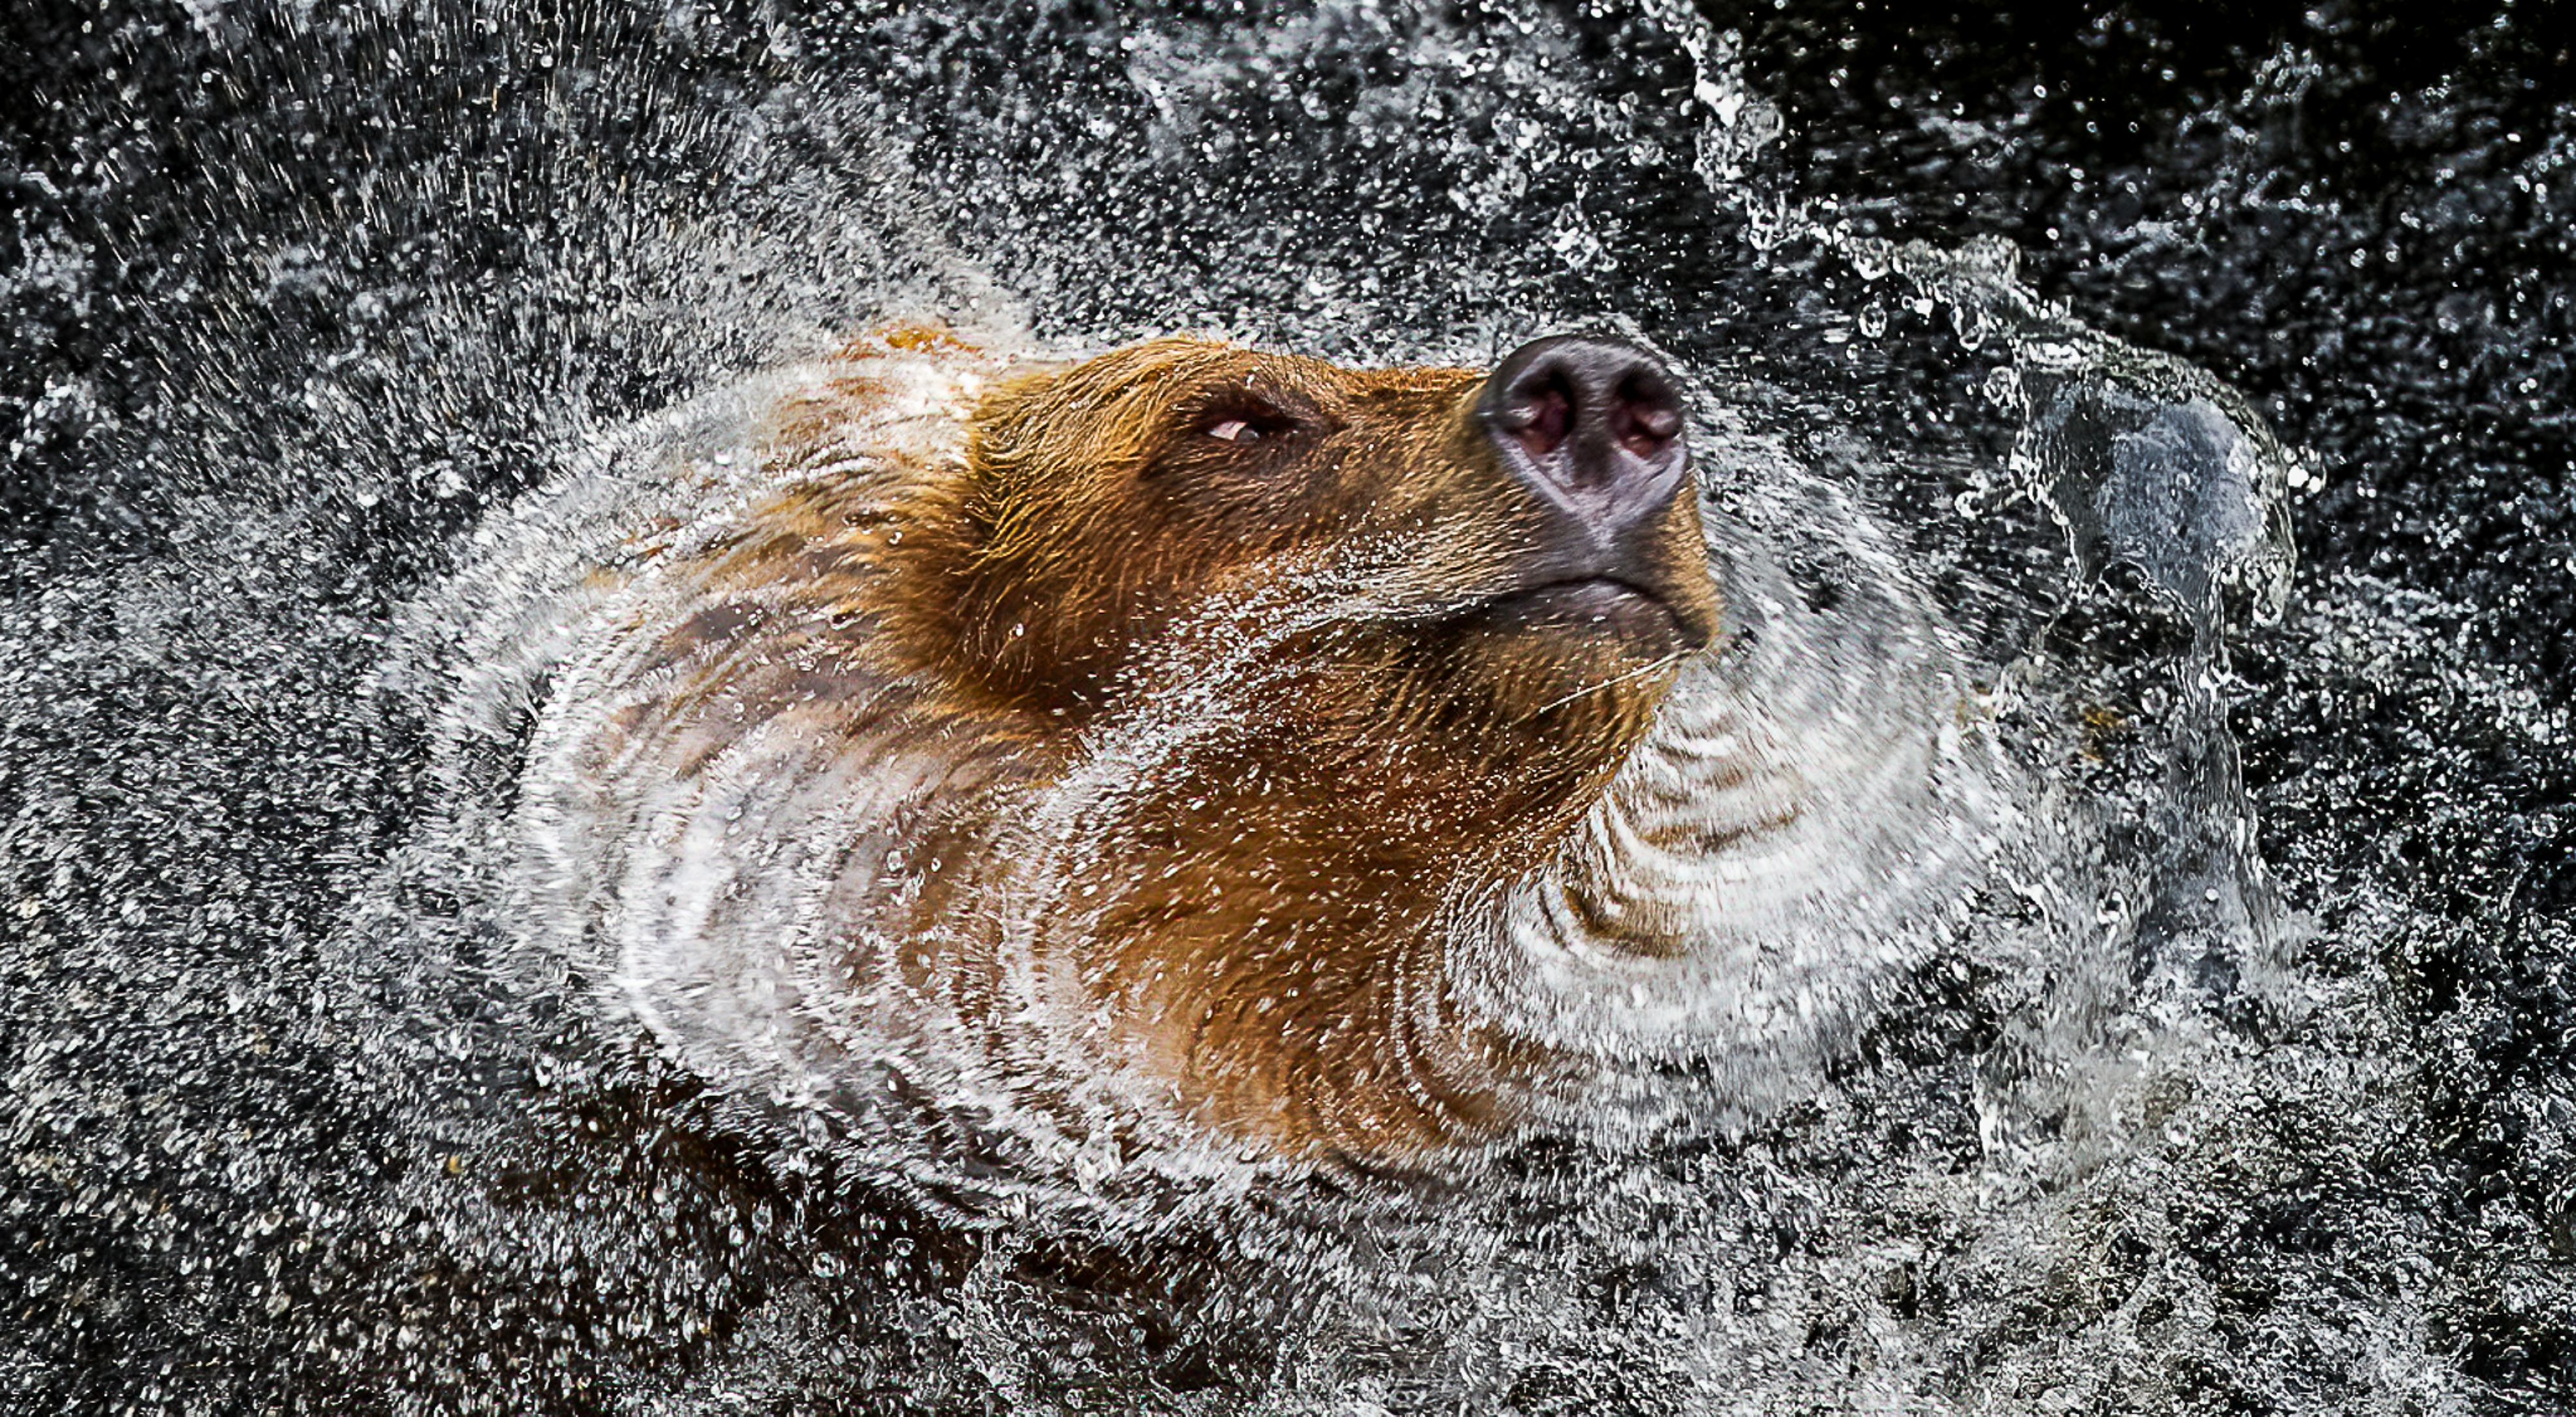  A close up of a grizzly bear's face captures the moment as it shakes water off its fur.